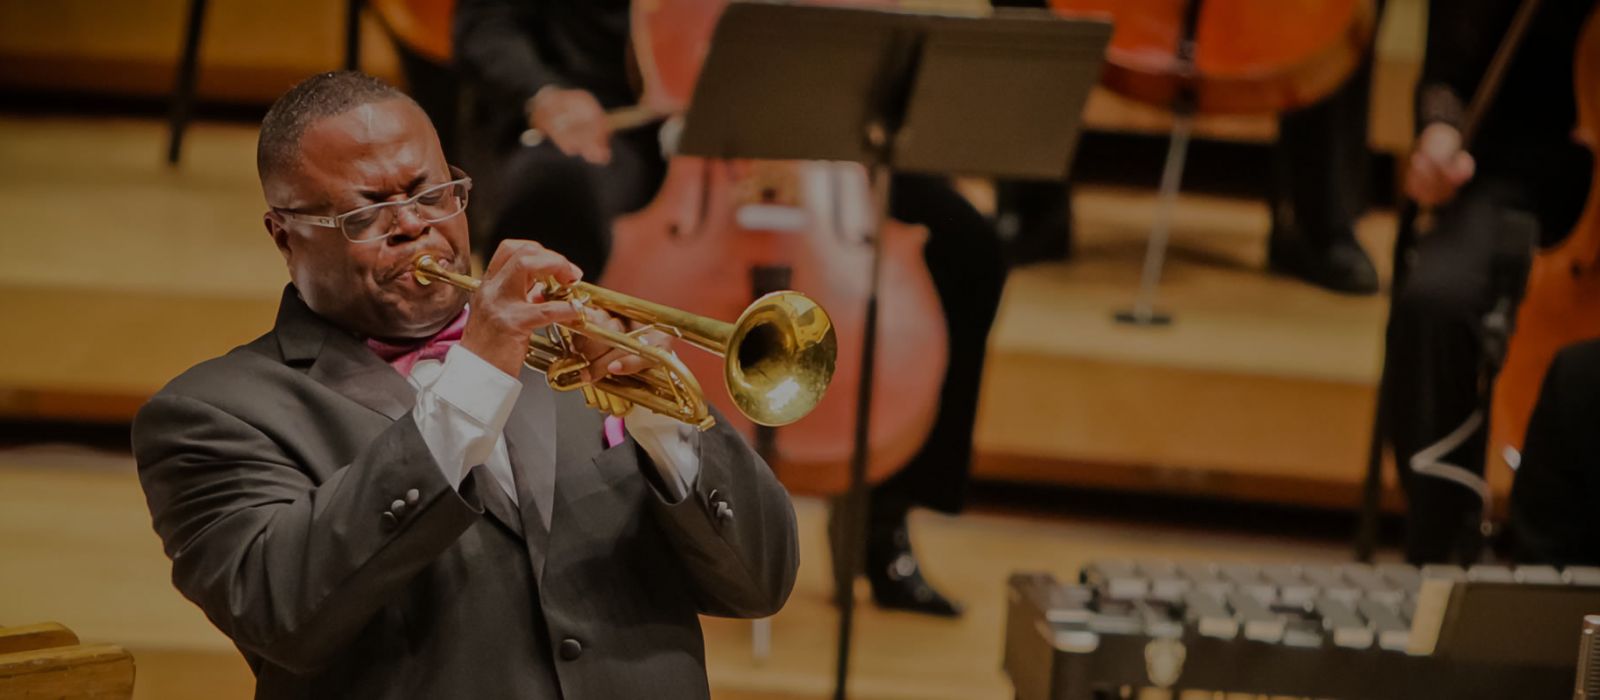 America's definitive Third Stream orchestra combining jazz and classical music